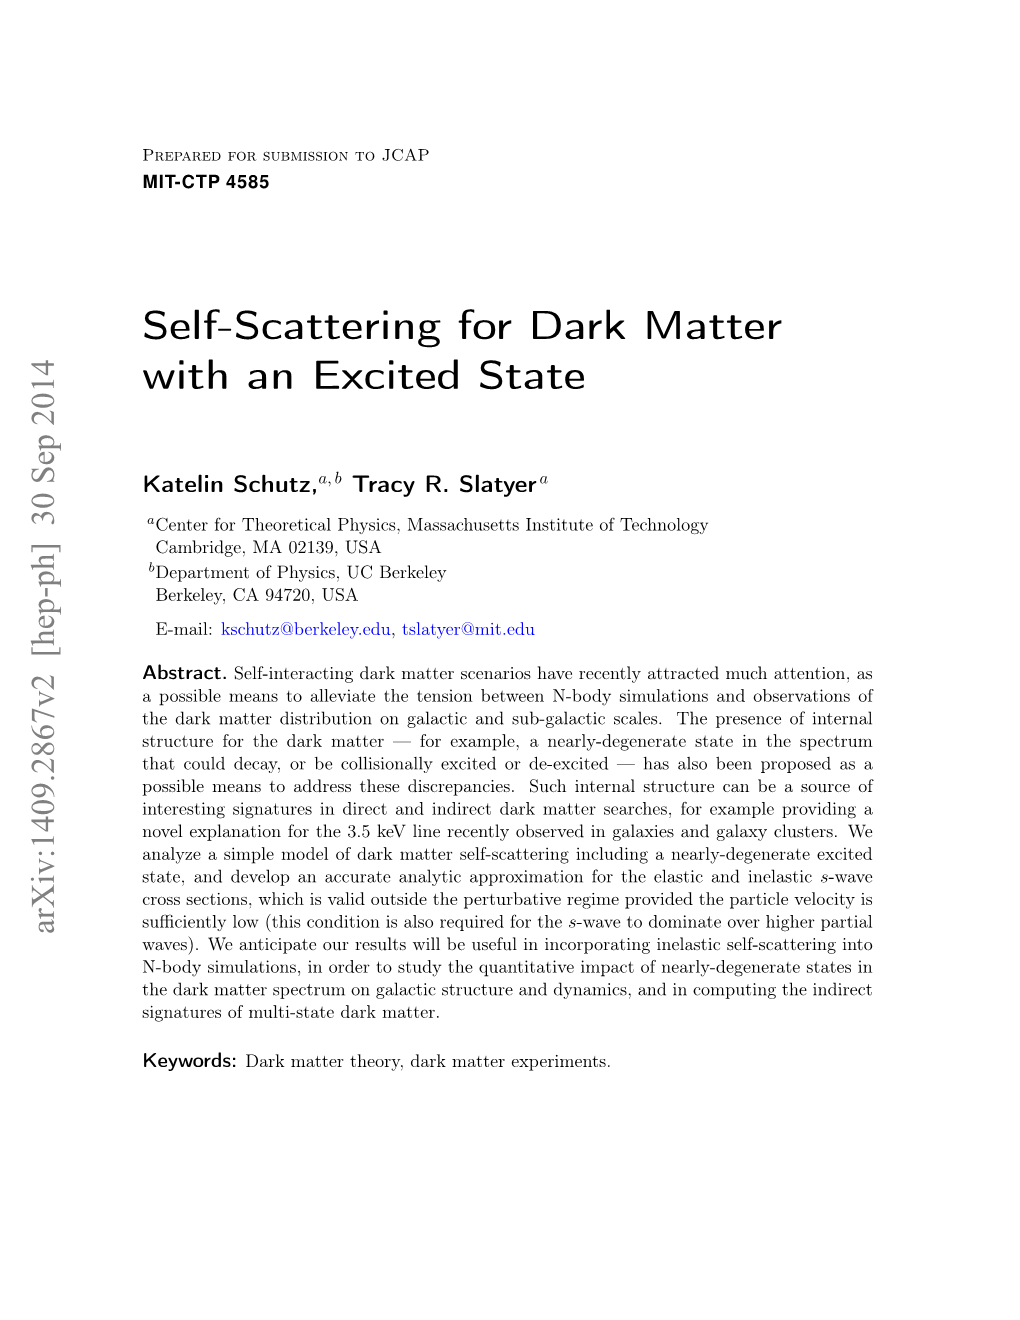 Self-Scattering for Dark Matter with an Excited State